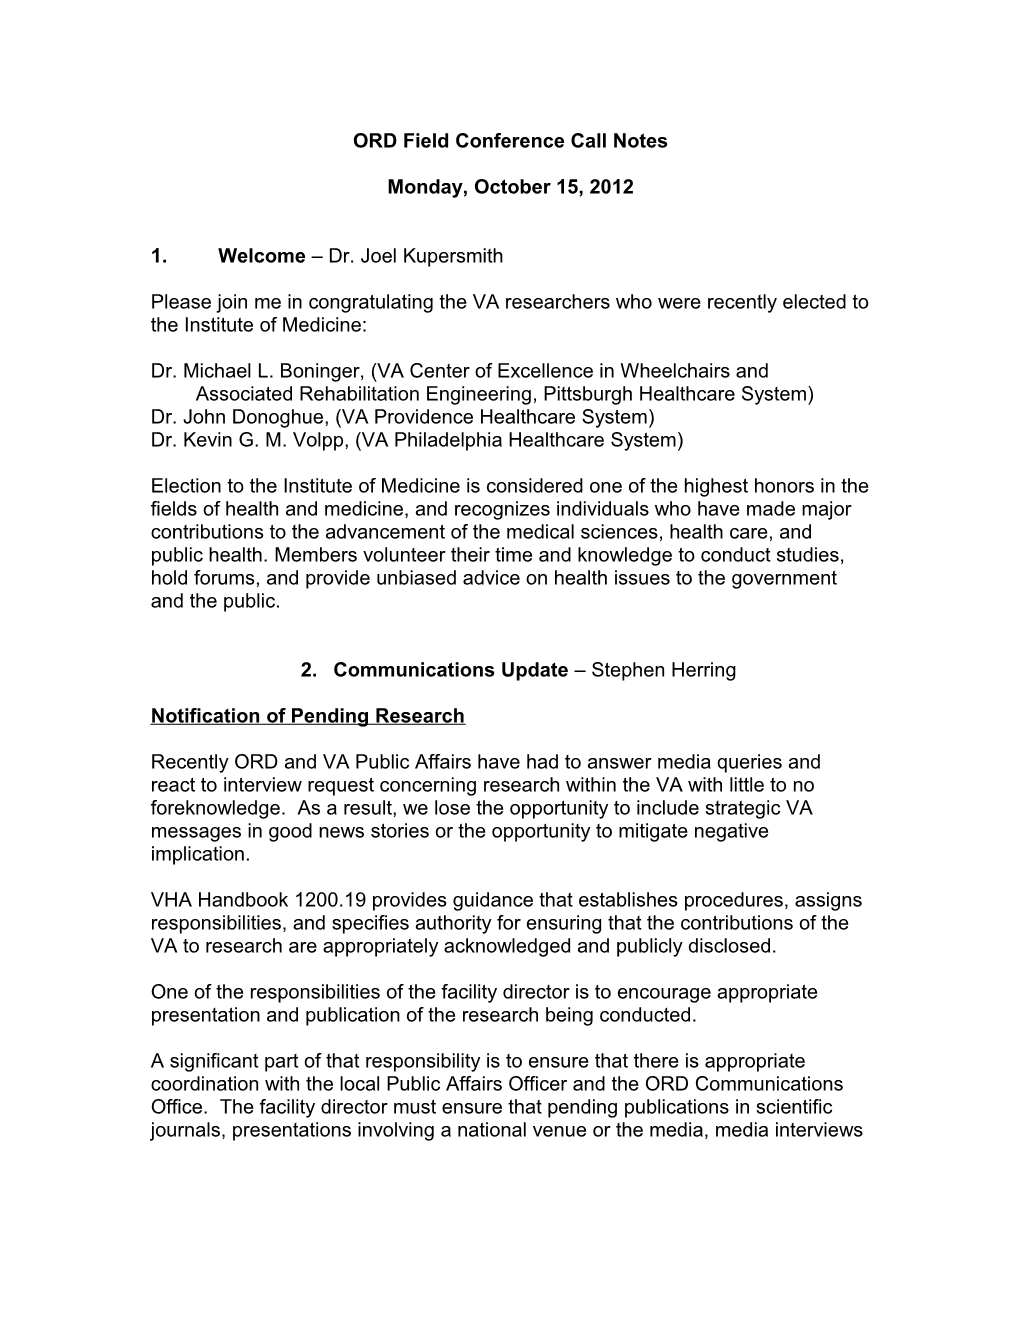 ORD Field Conference Call Notes, Oct. 15, 2012